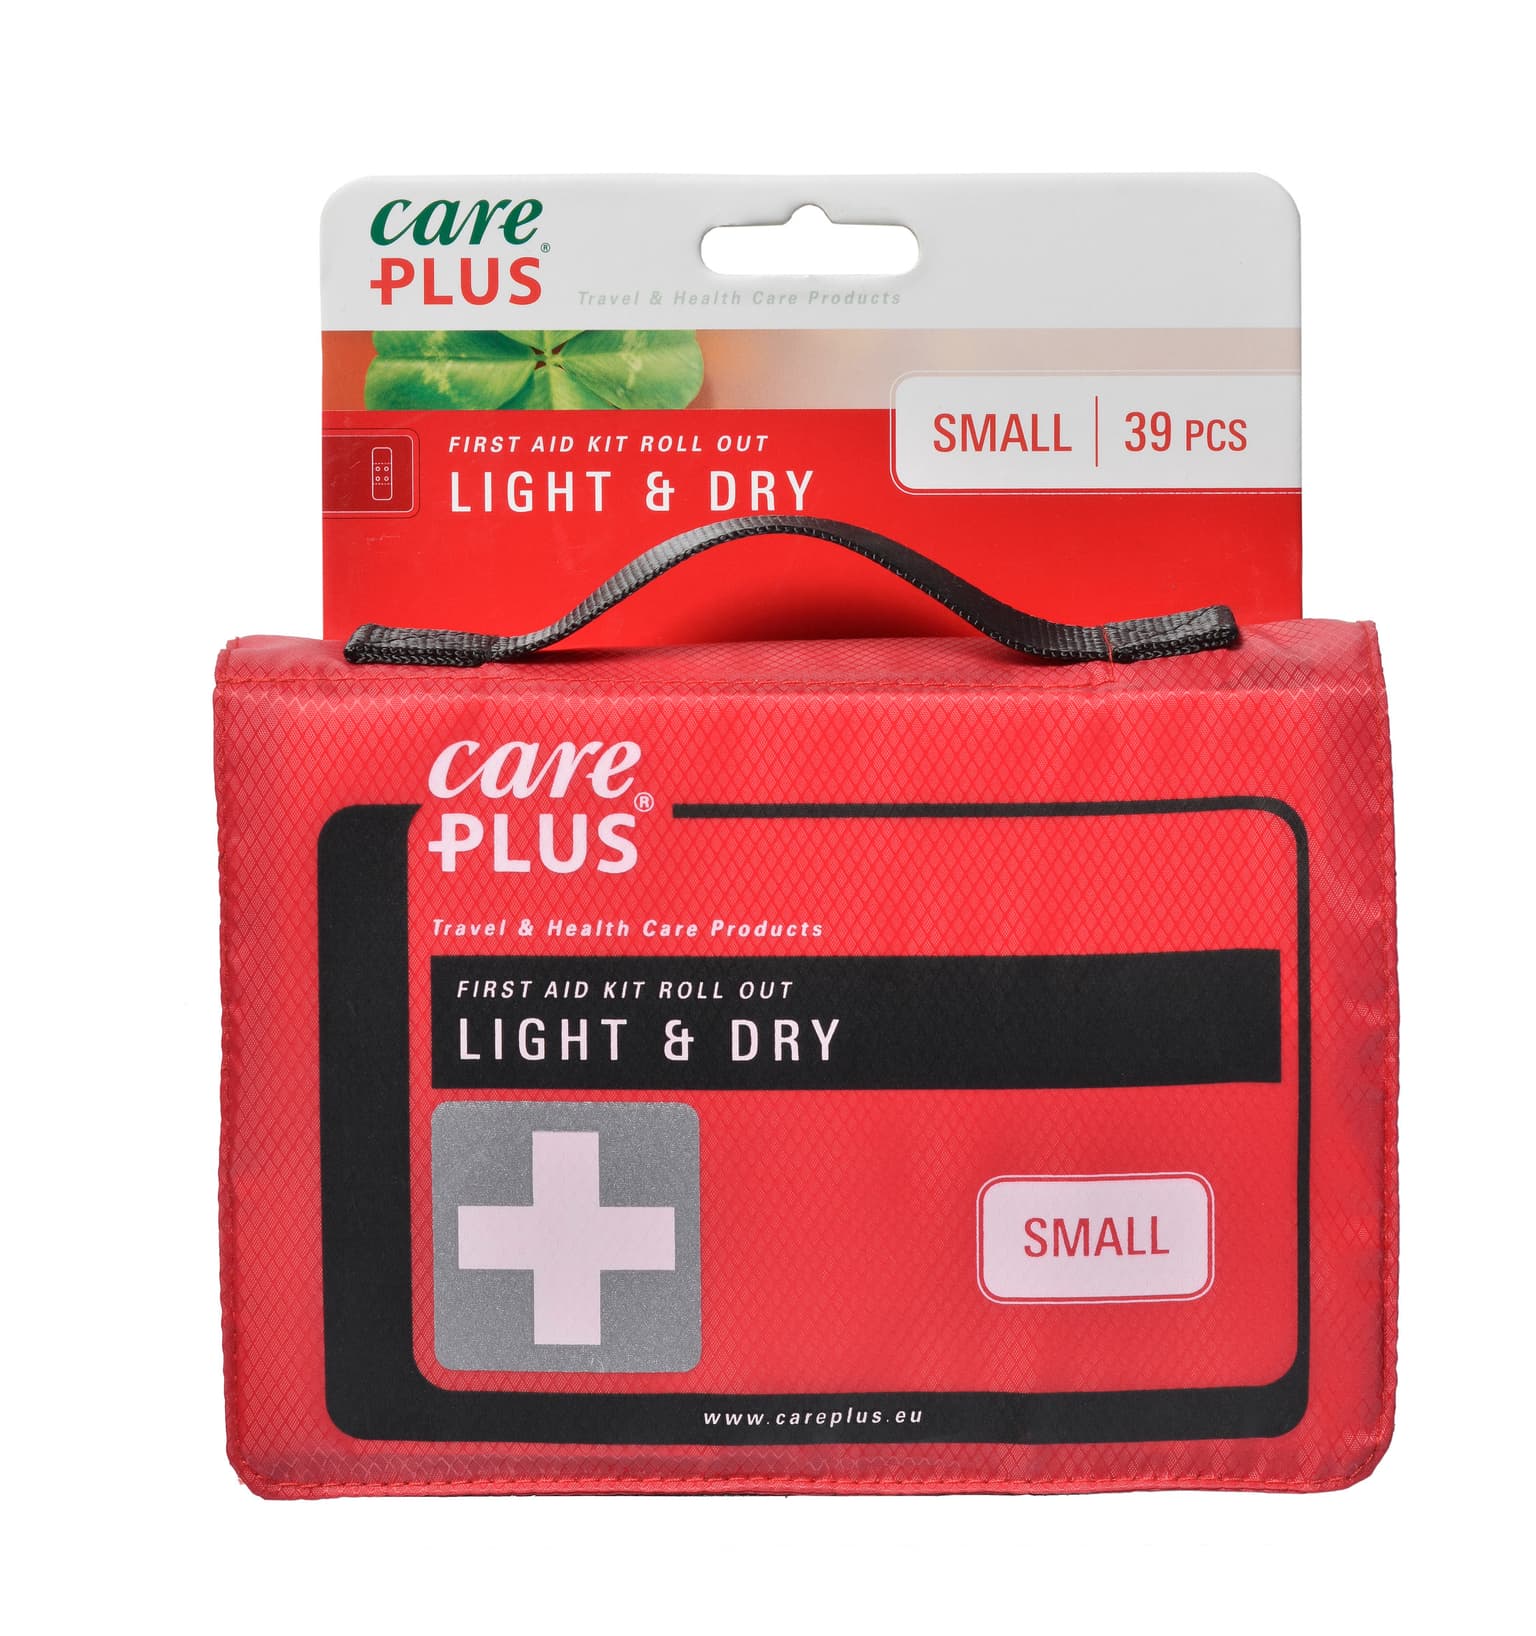 Care Plus Care Plus First Aid Roll Out - Light & Dry Small Erste Hilfe Set 1